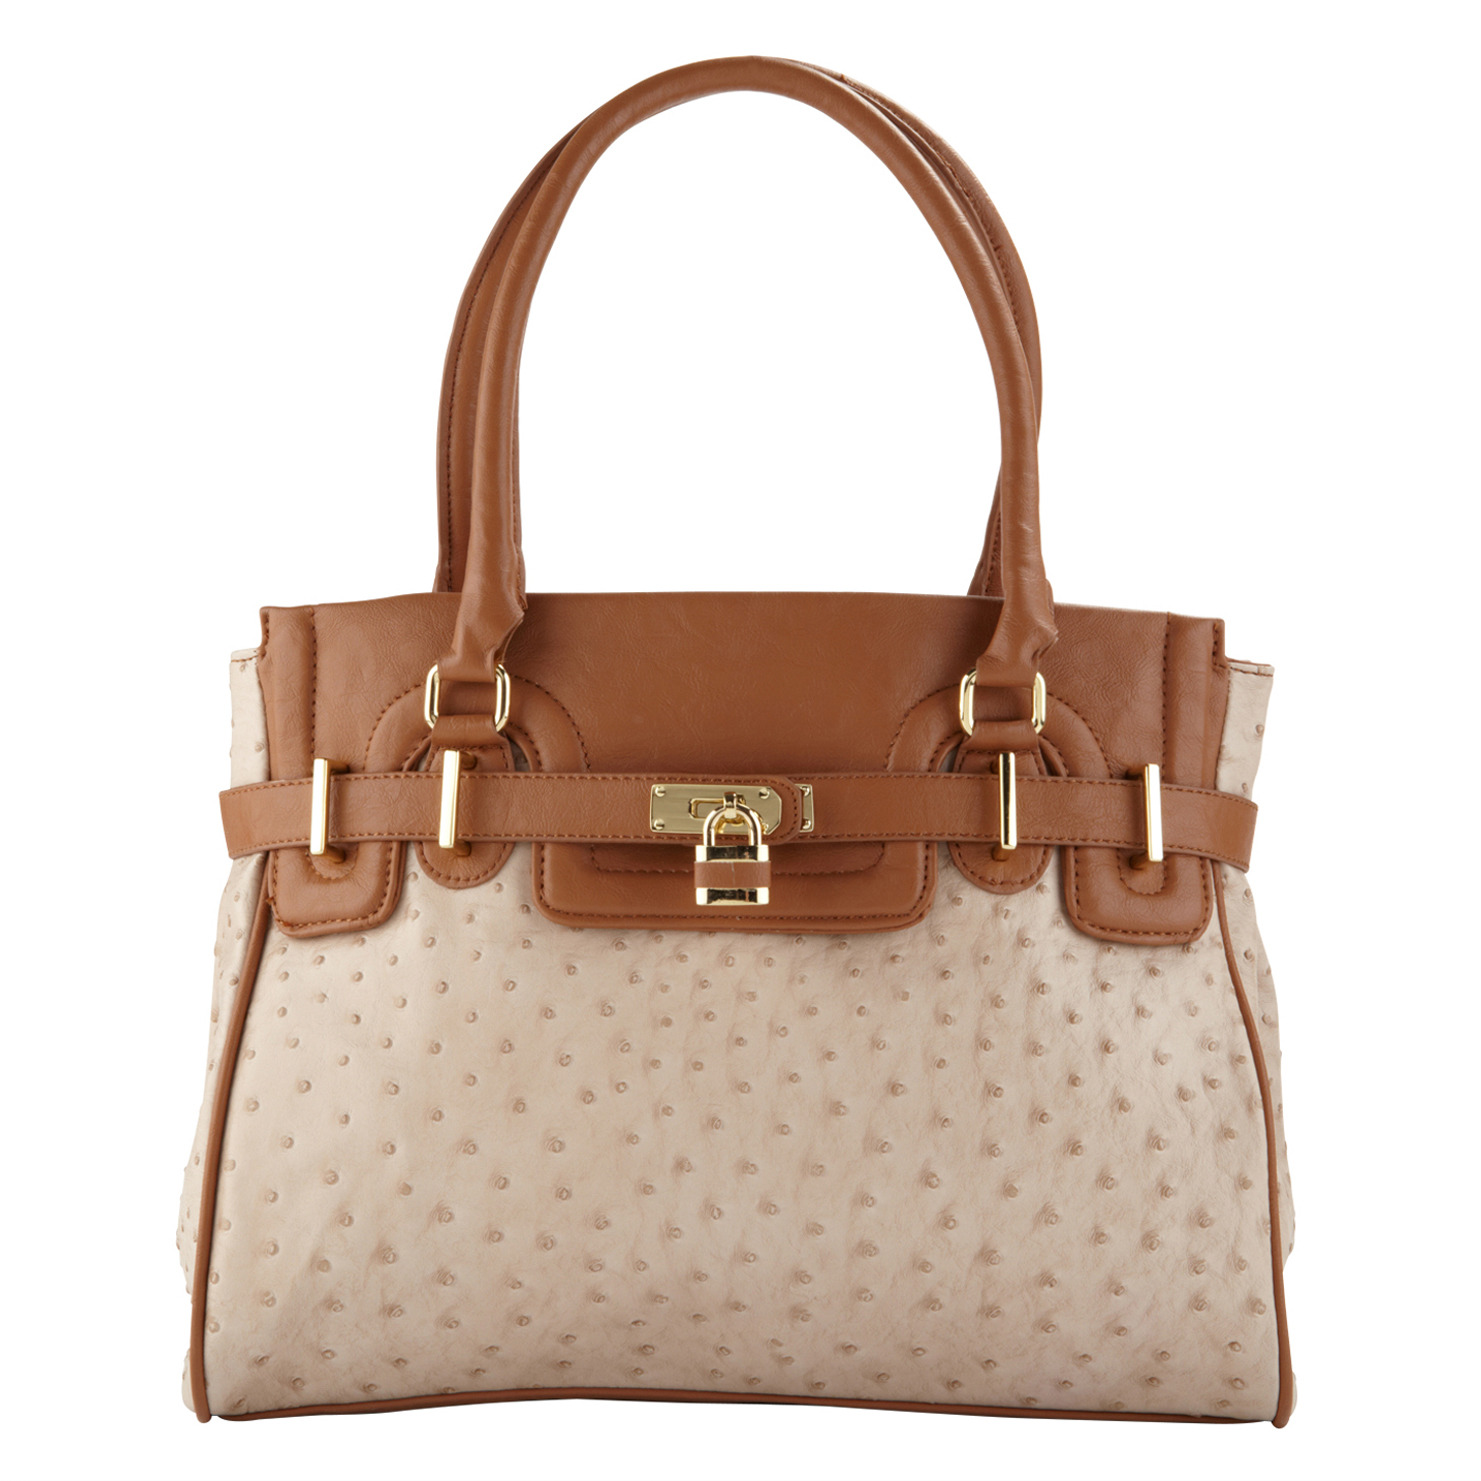 Aldo Picketpin Handbag : All About Shoes & Accessories